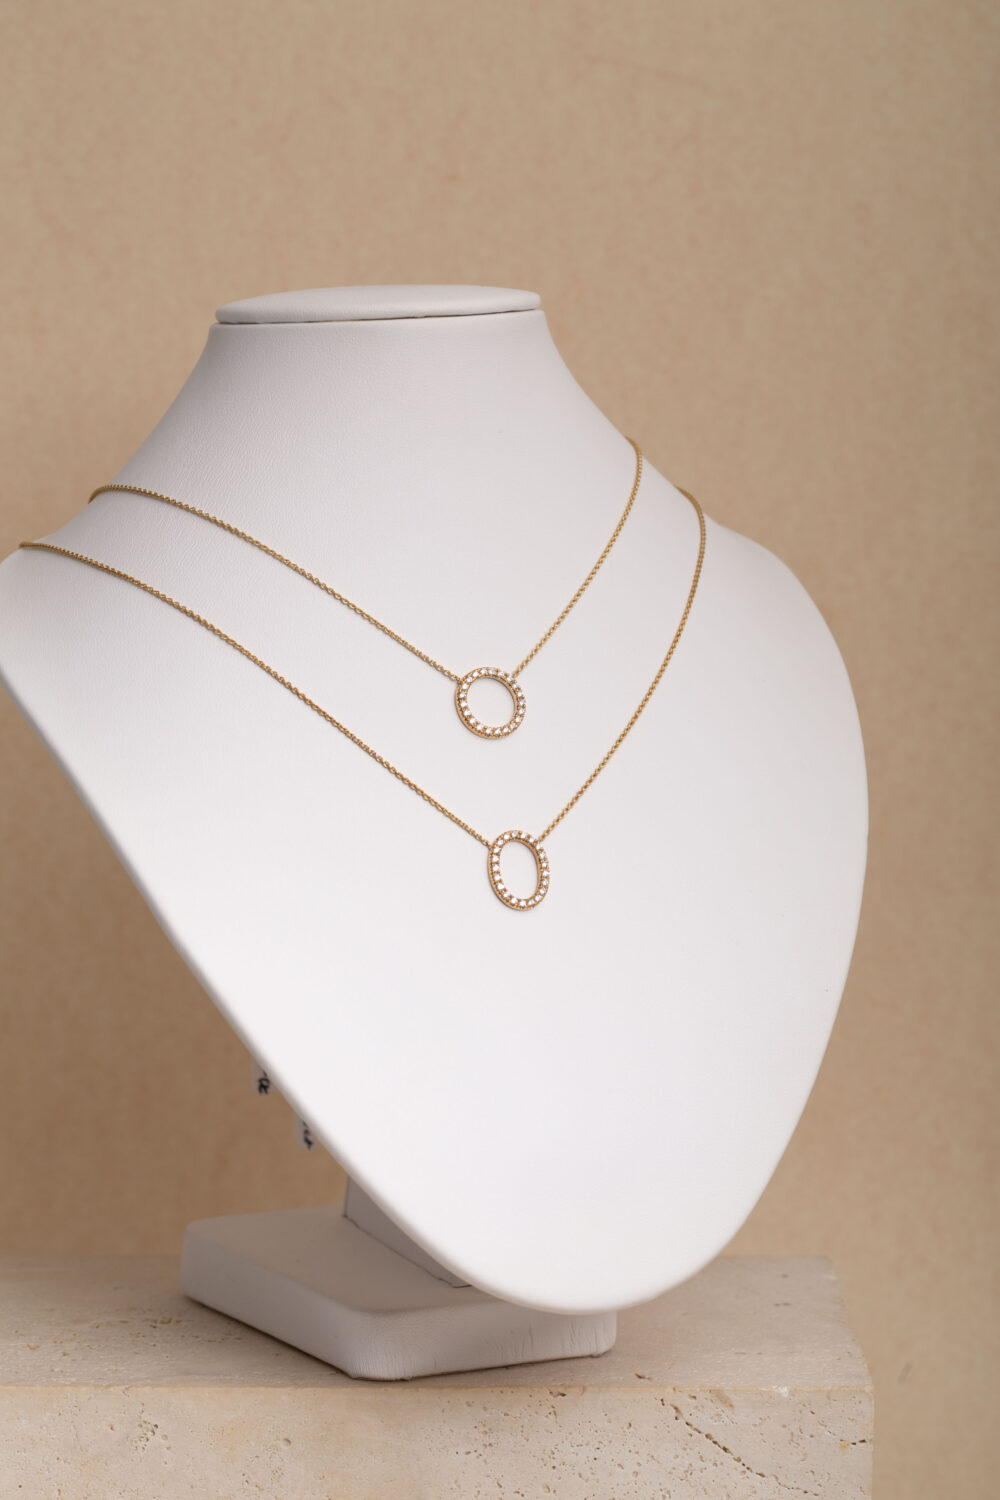 Necklace crafted from 18-karat gold set with brilliant cut diamonds.